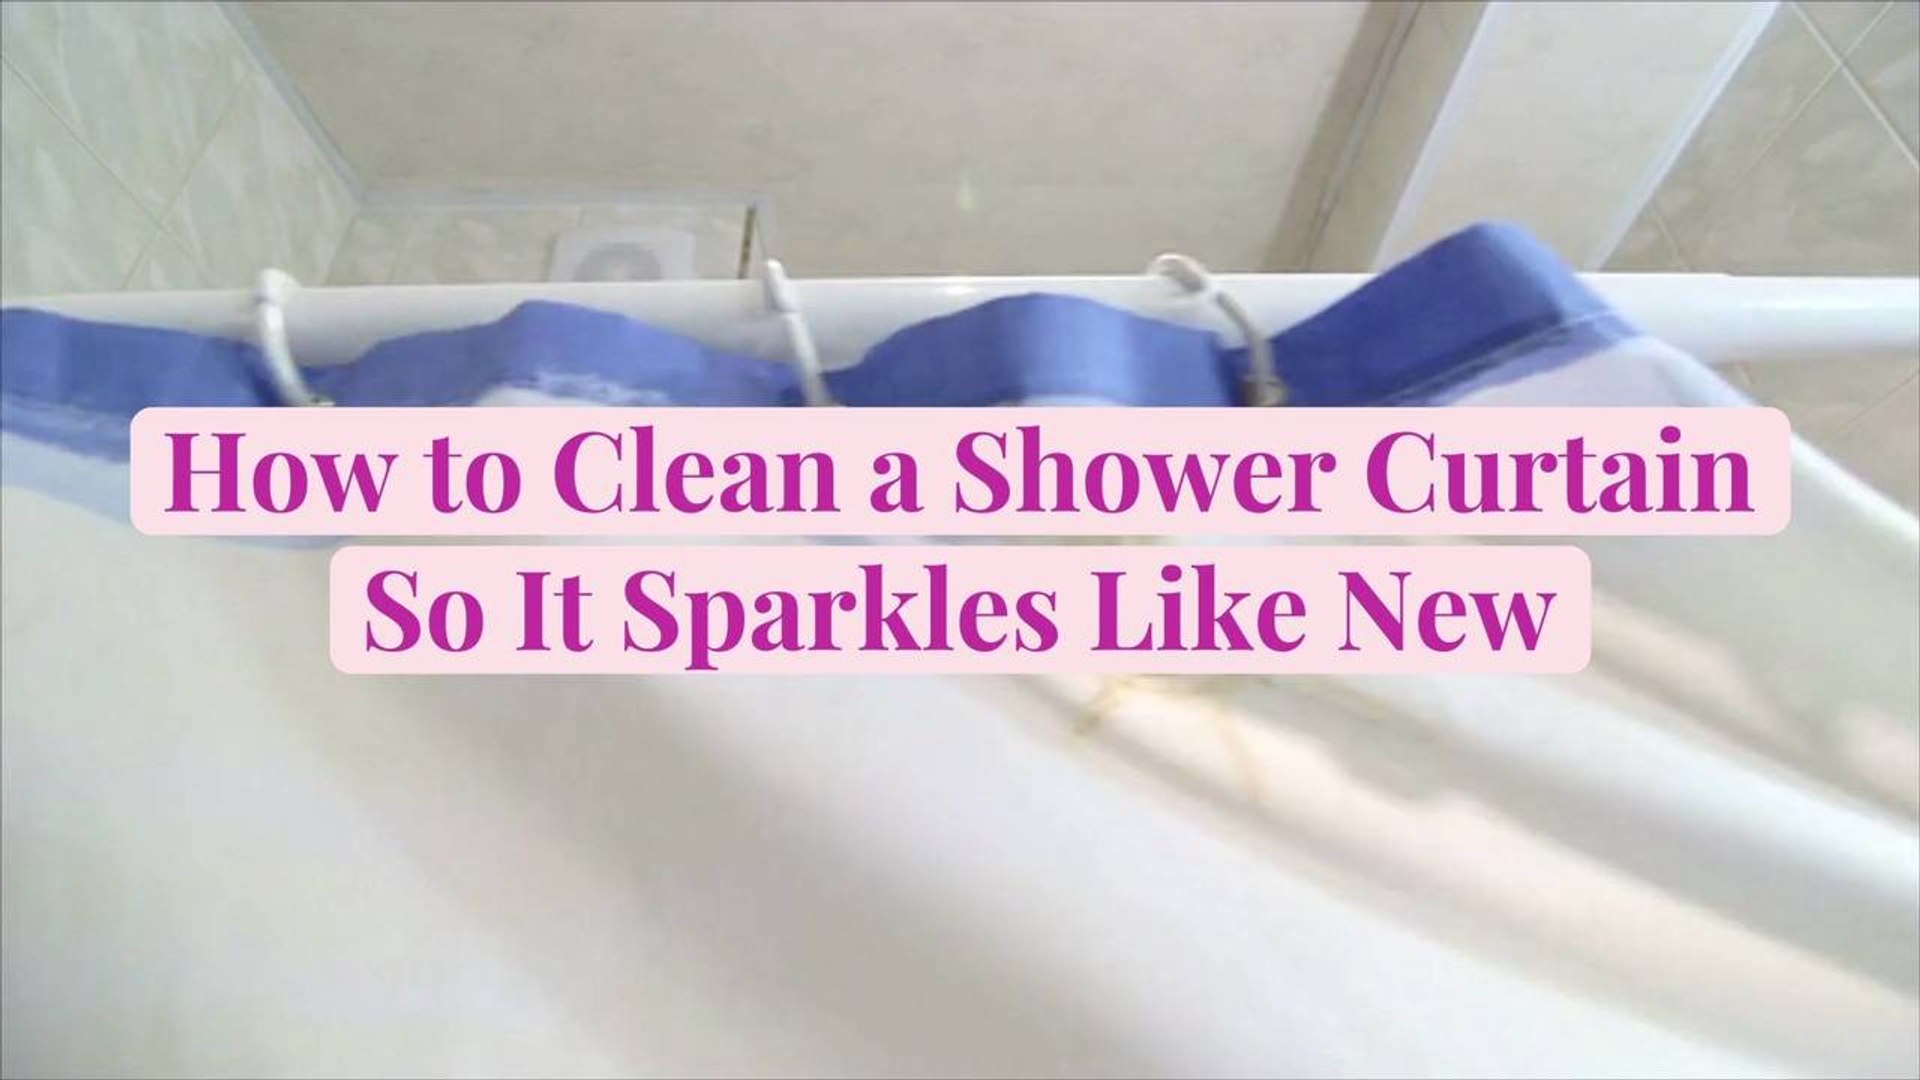 How to Clean a Shower Curtain So It Sparkles Like New